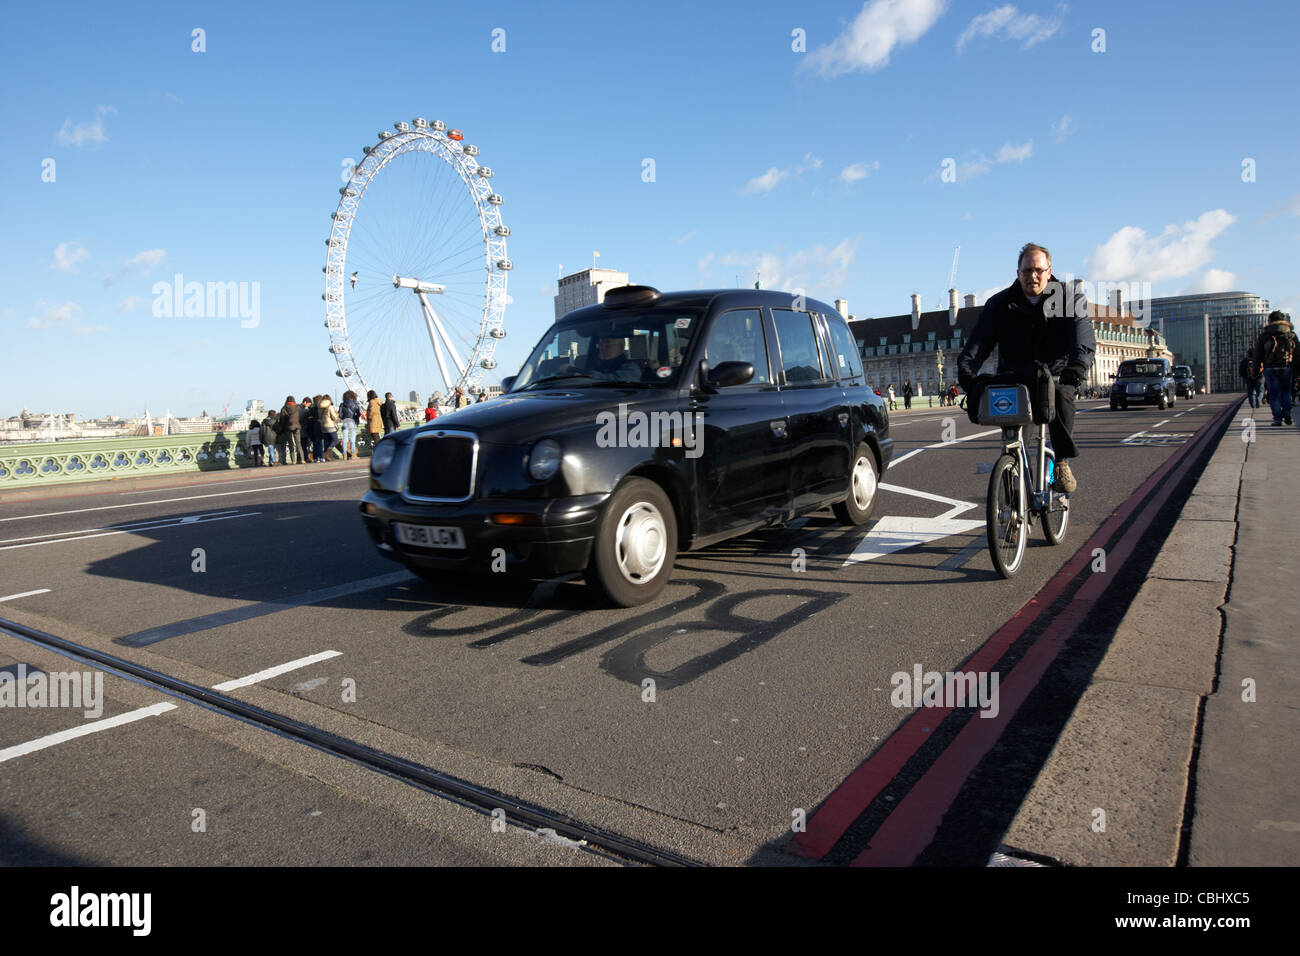 man on hired cycle being overtaken by black london cab taxi on westminster bridge in central london england united kingdom uk Stock Photo